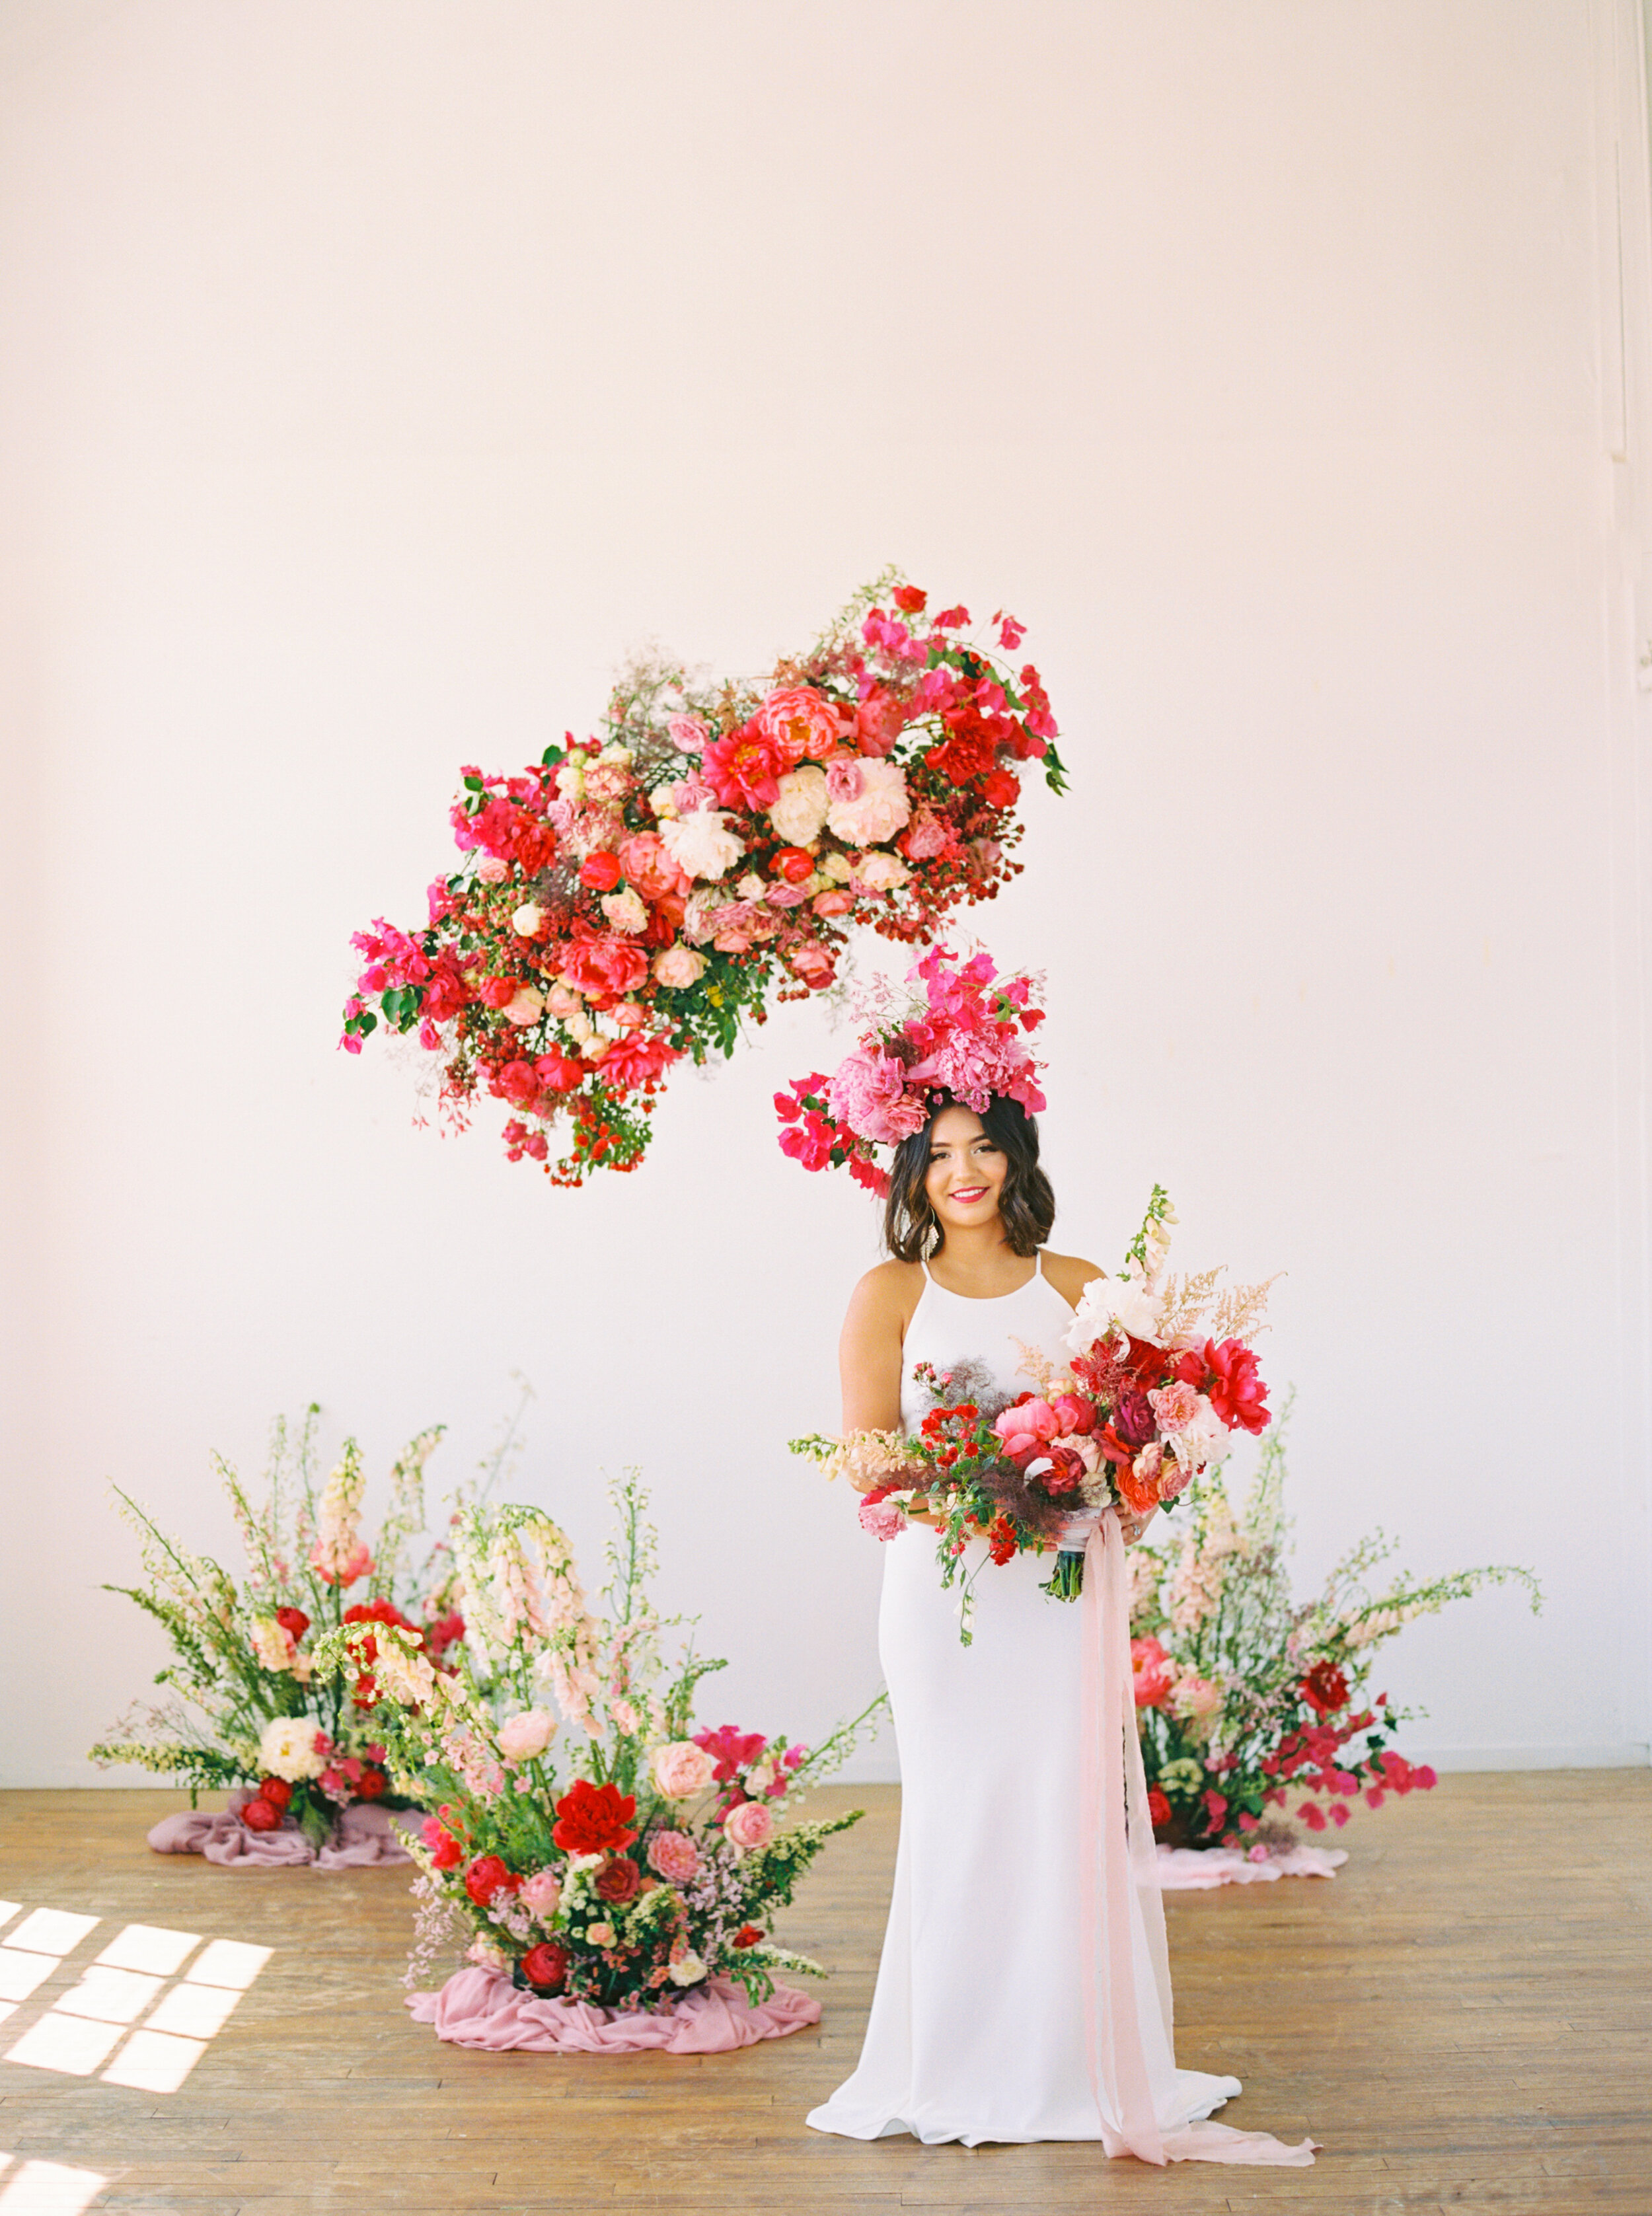 A Romantic Wedding Elopement Filled with Colorful Fuchsia - Sarahi Hadden Submission-7.jpg